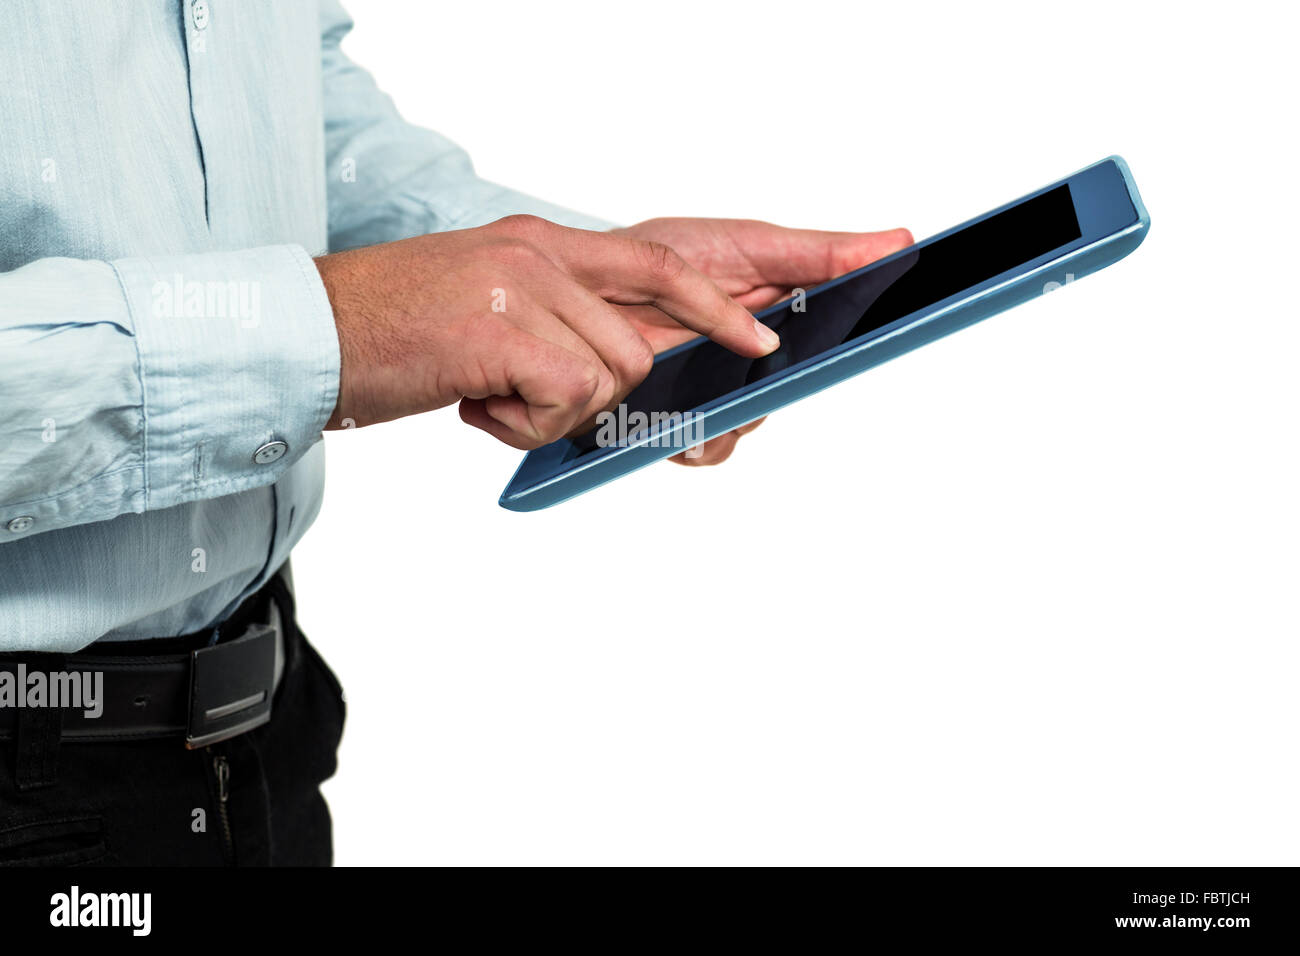 Midsection of man using digital tablet Stock Photo